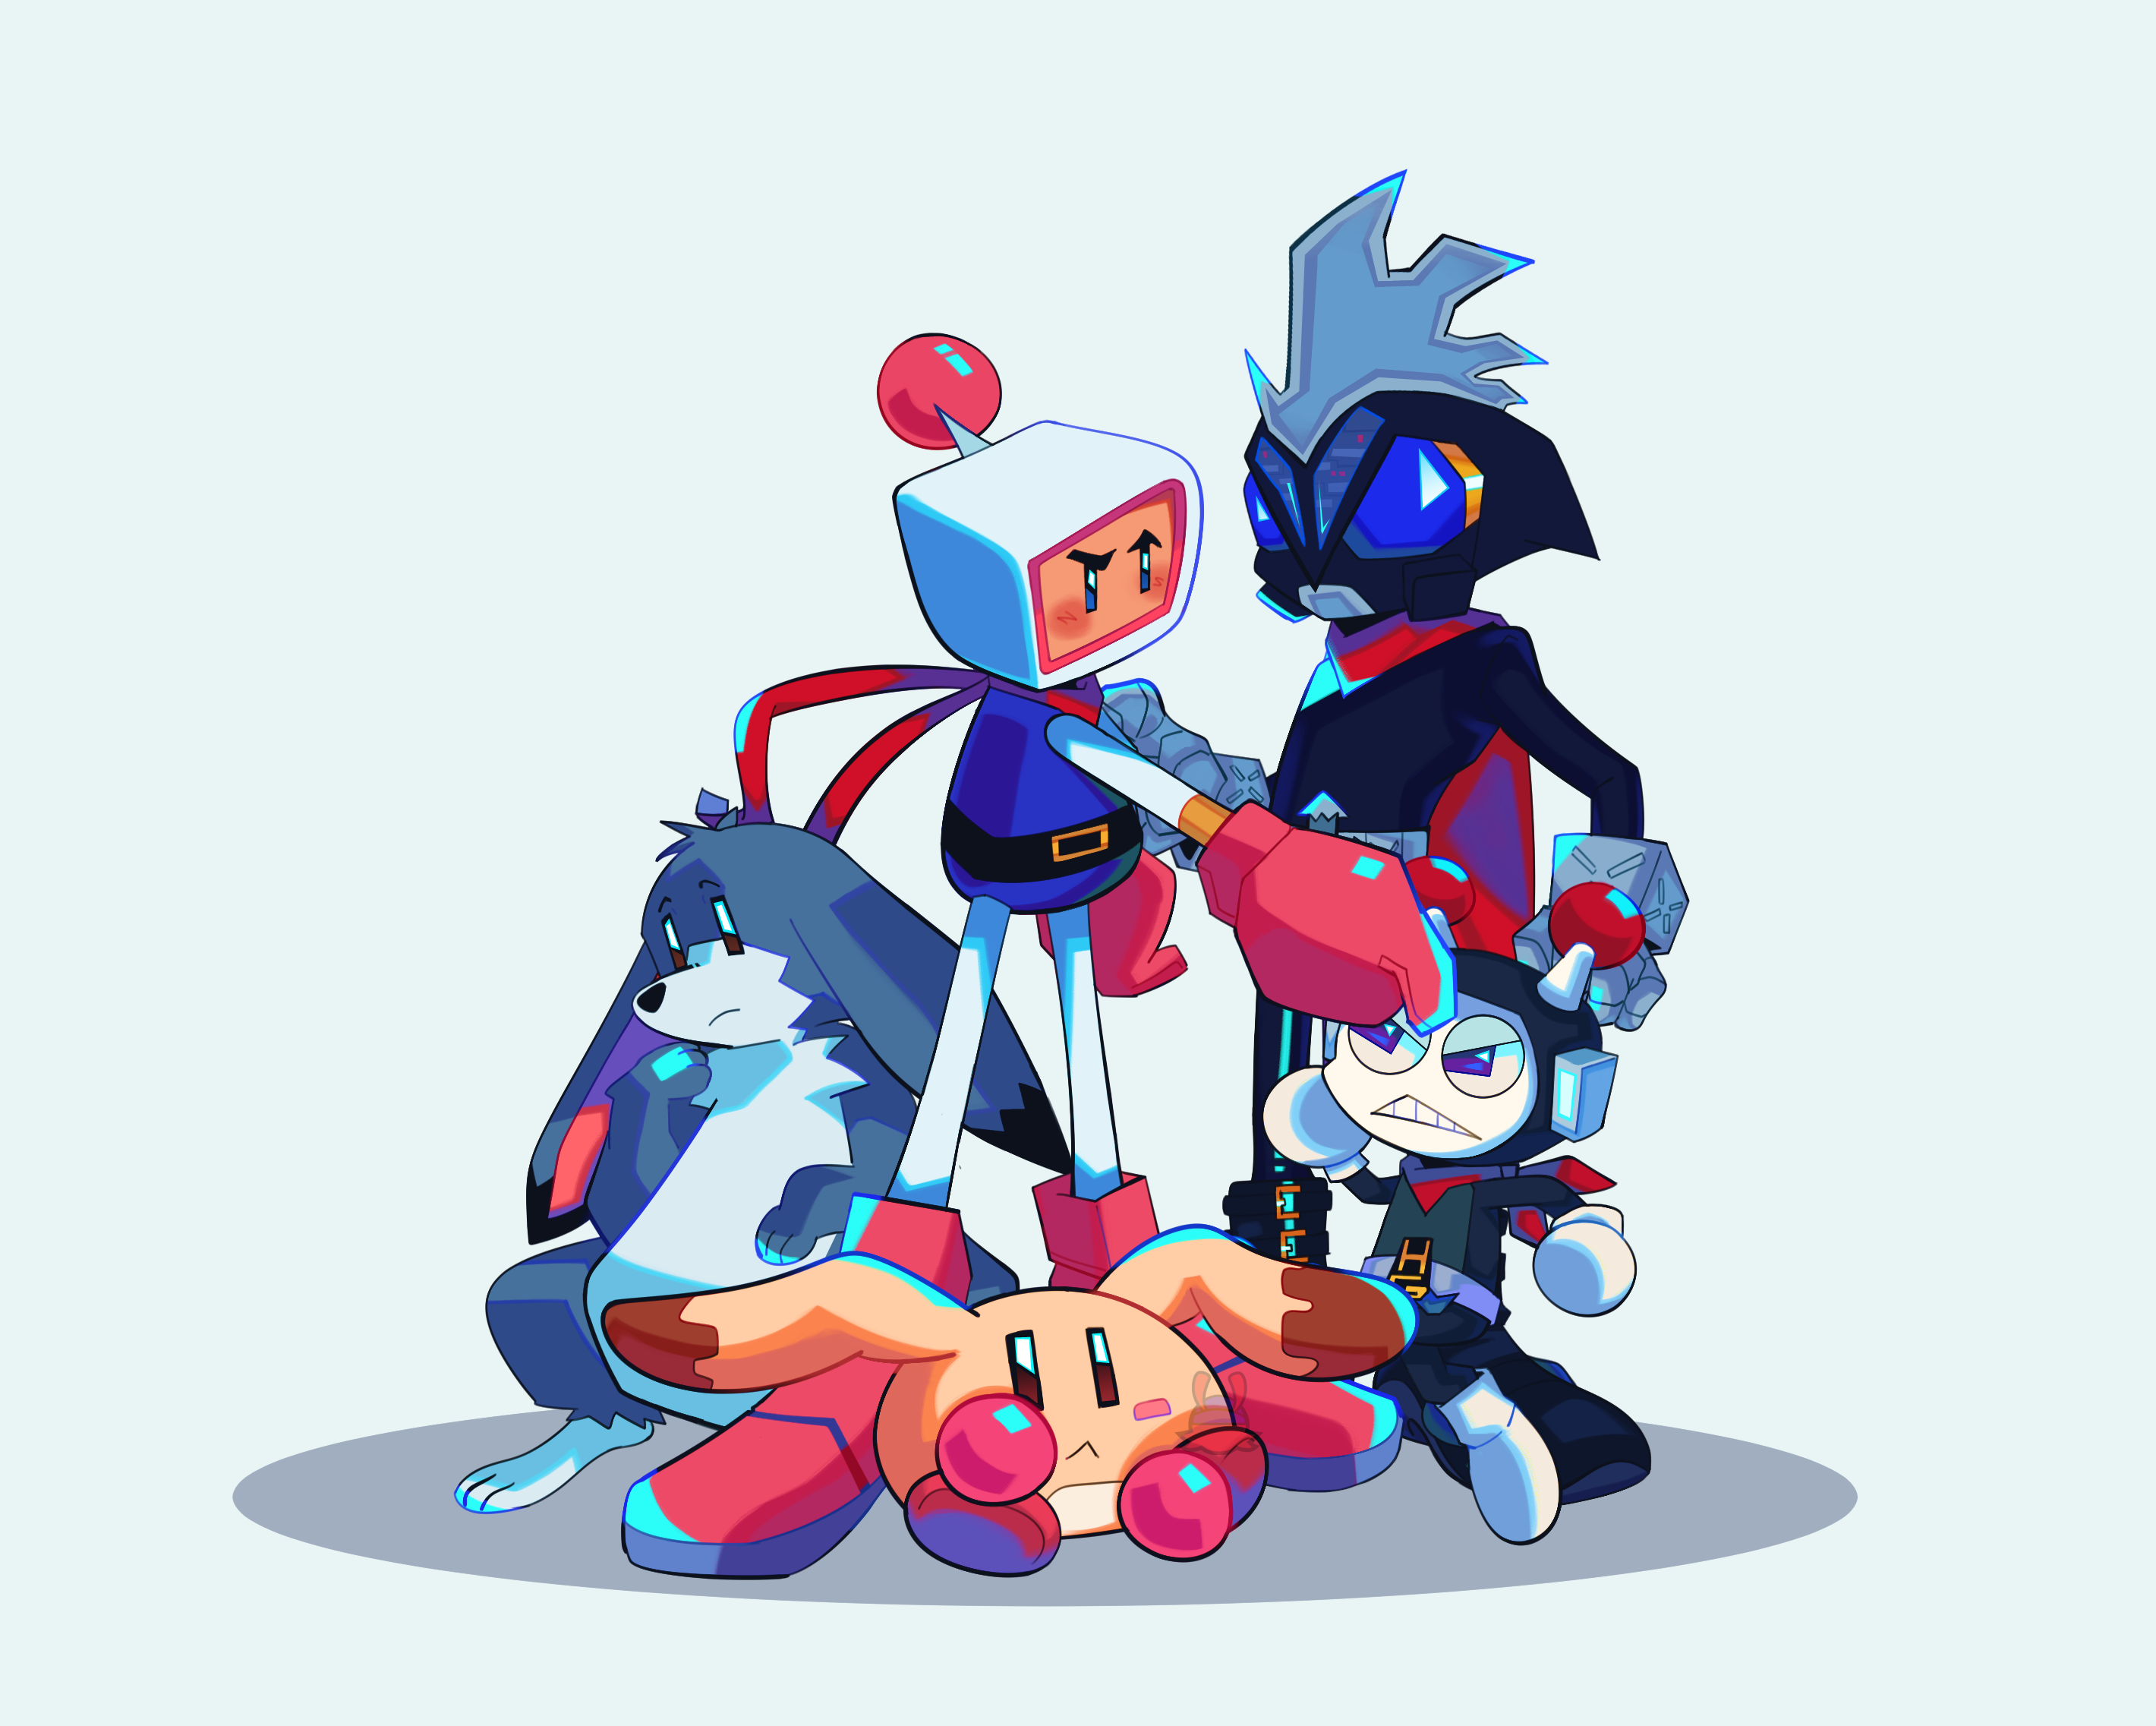 Group shot of Bomberman characters White Bomber, Max, HigeHige Bandit, Pommy, and Rui all posed in reference to Sonic Adventure 2 Promotional Artwork